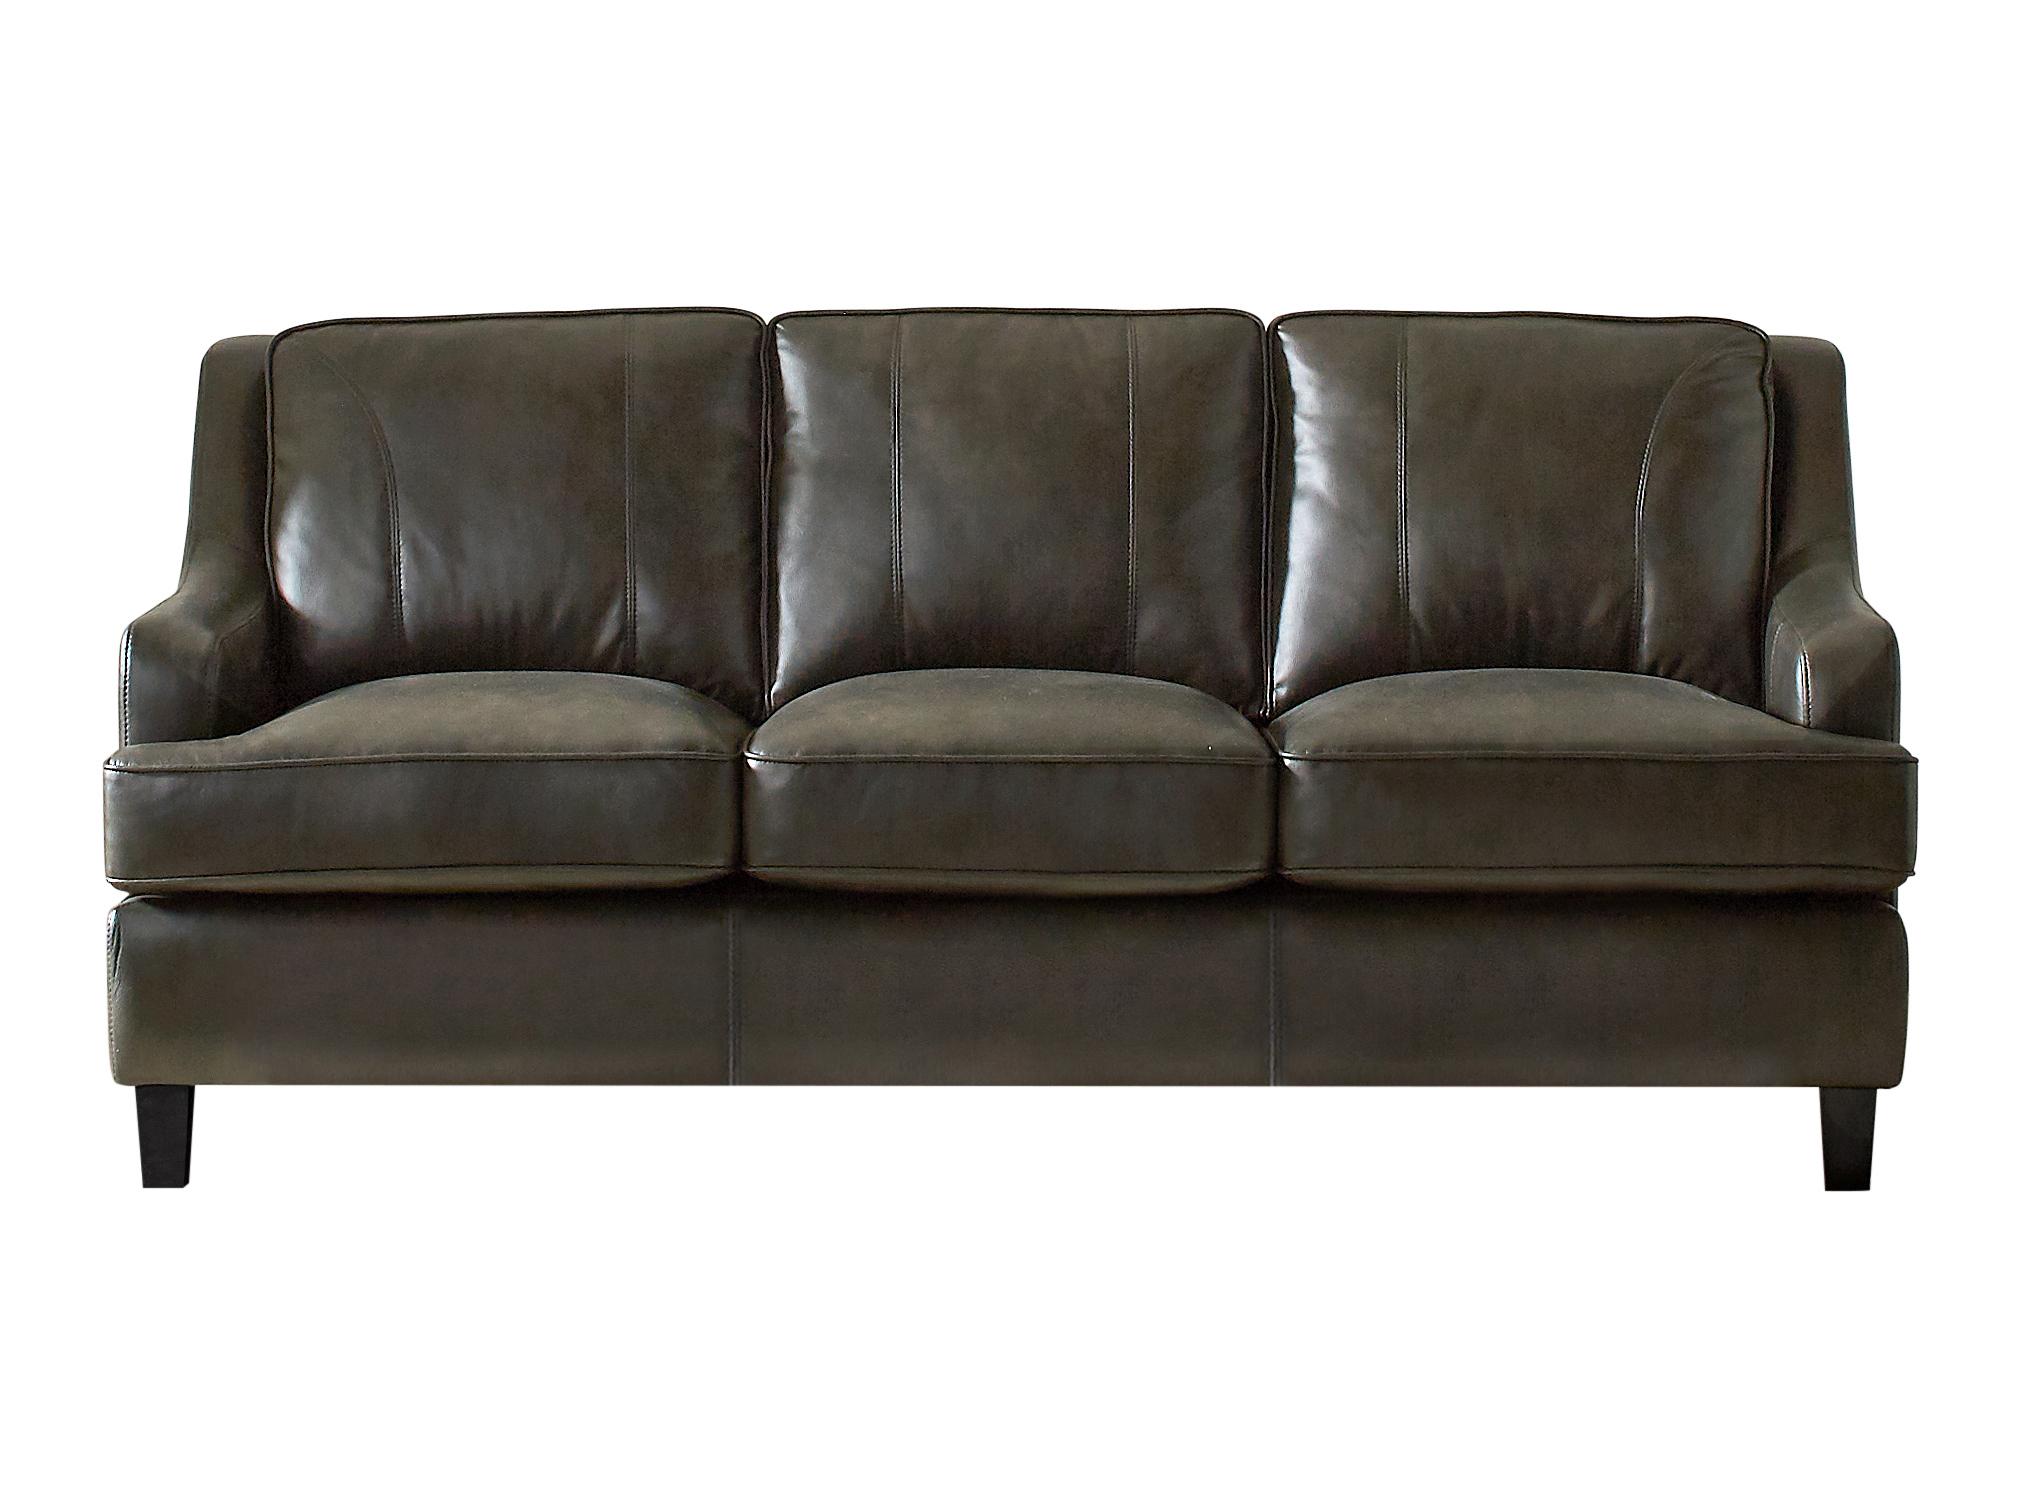 Transitional Sofa 552051 Clayton 552051 in Gray Leatherette